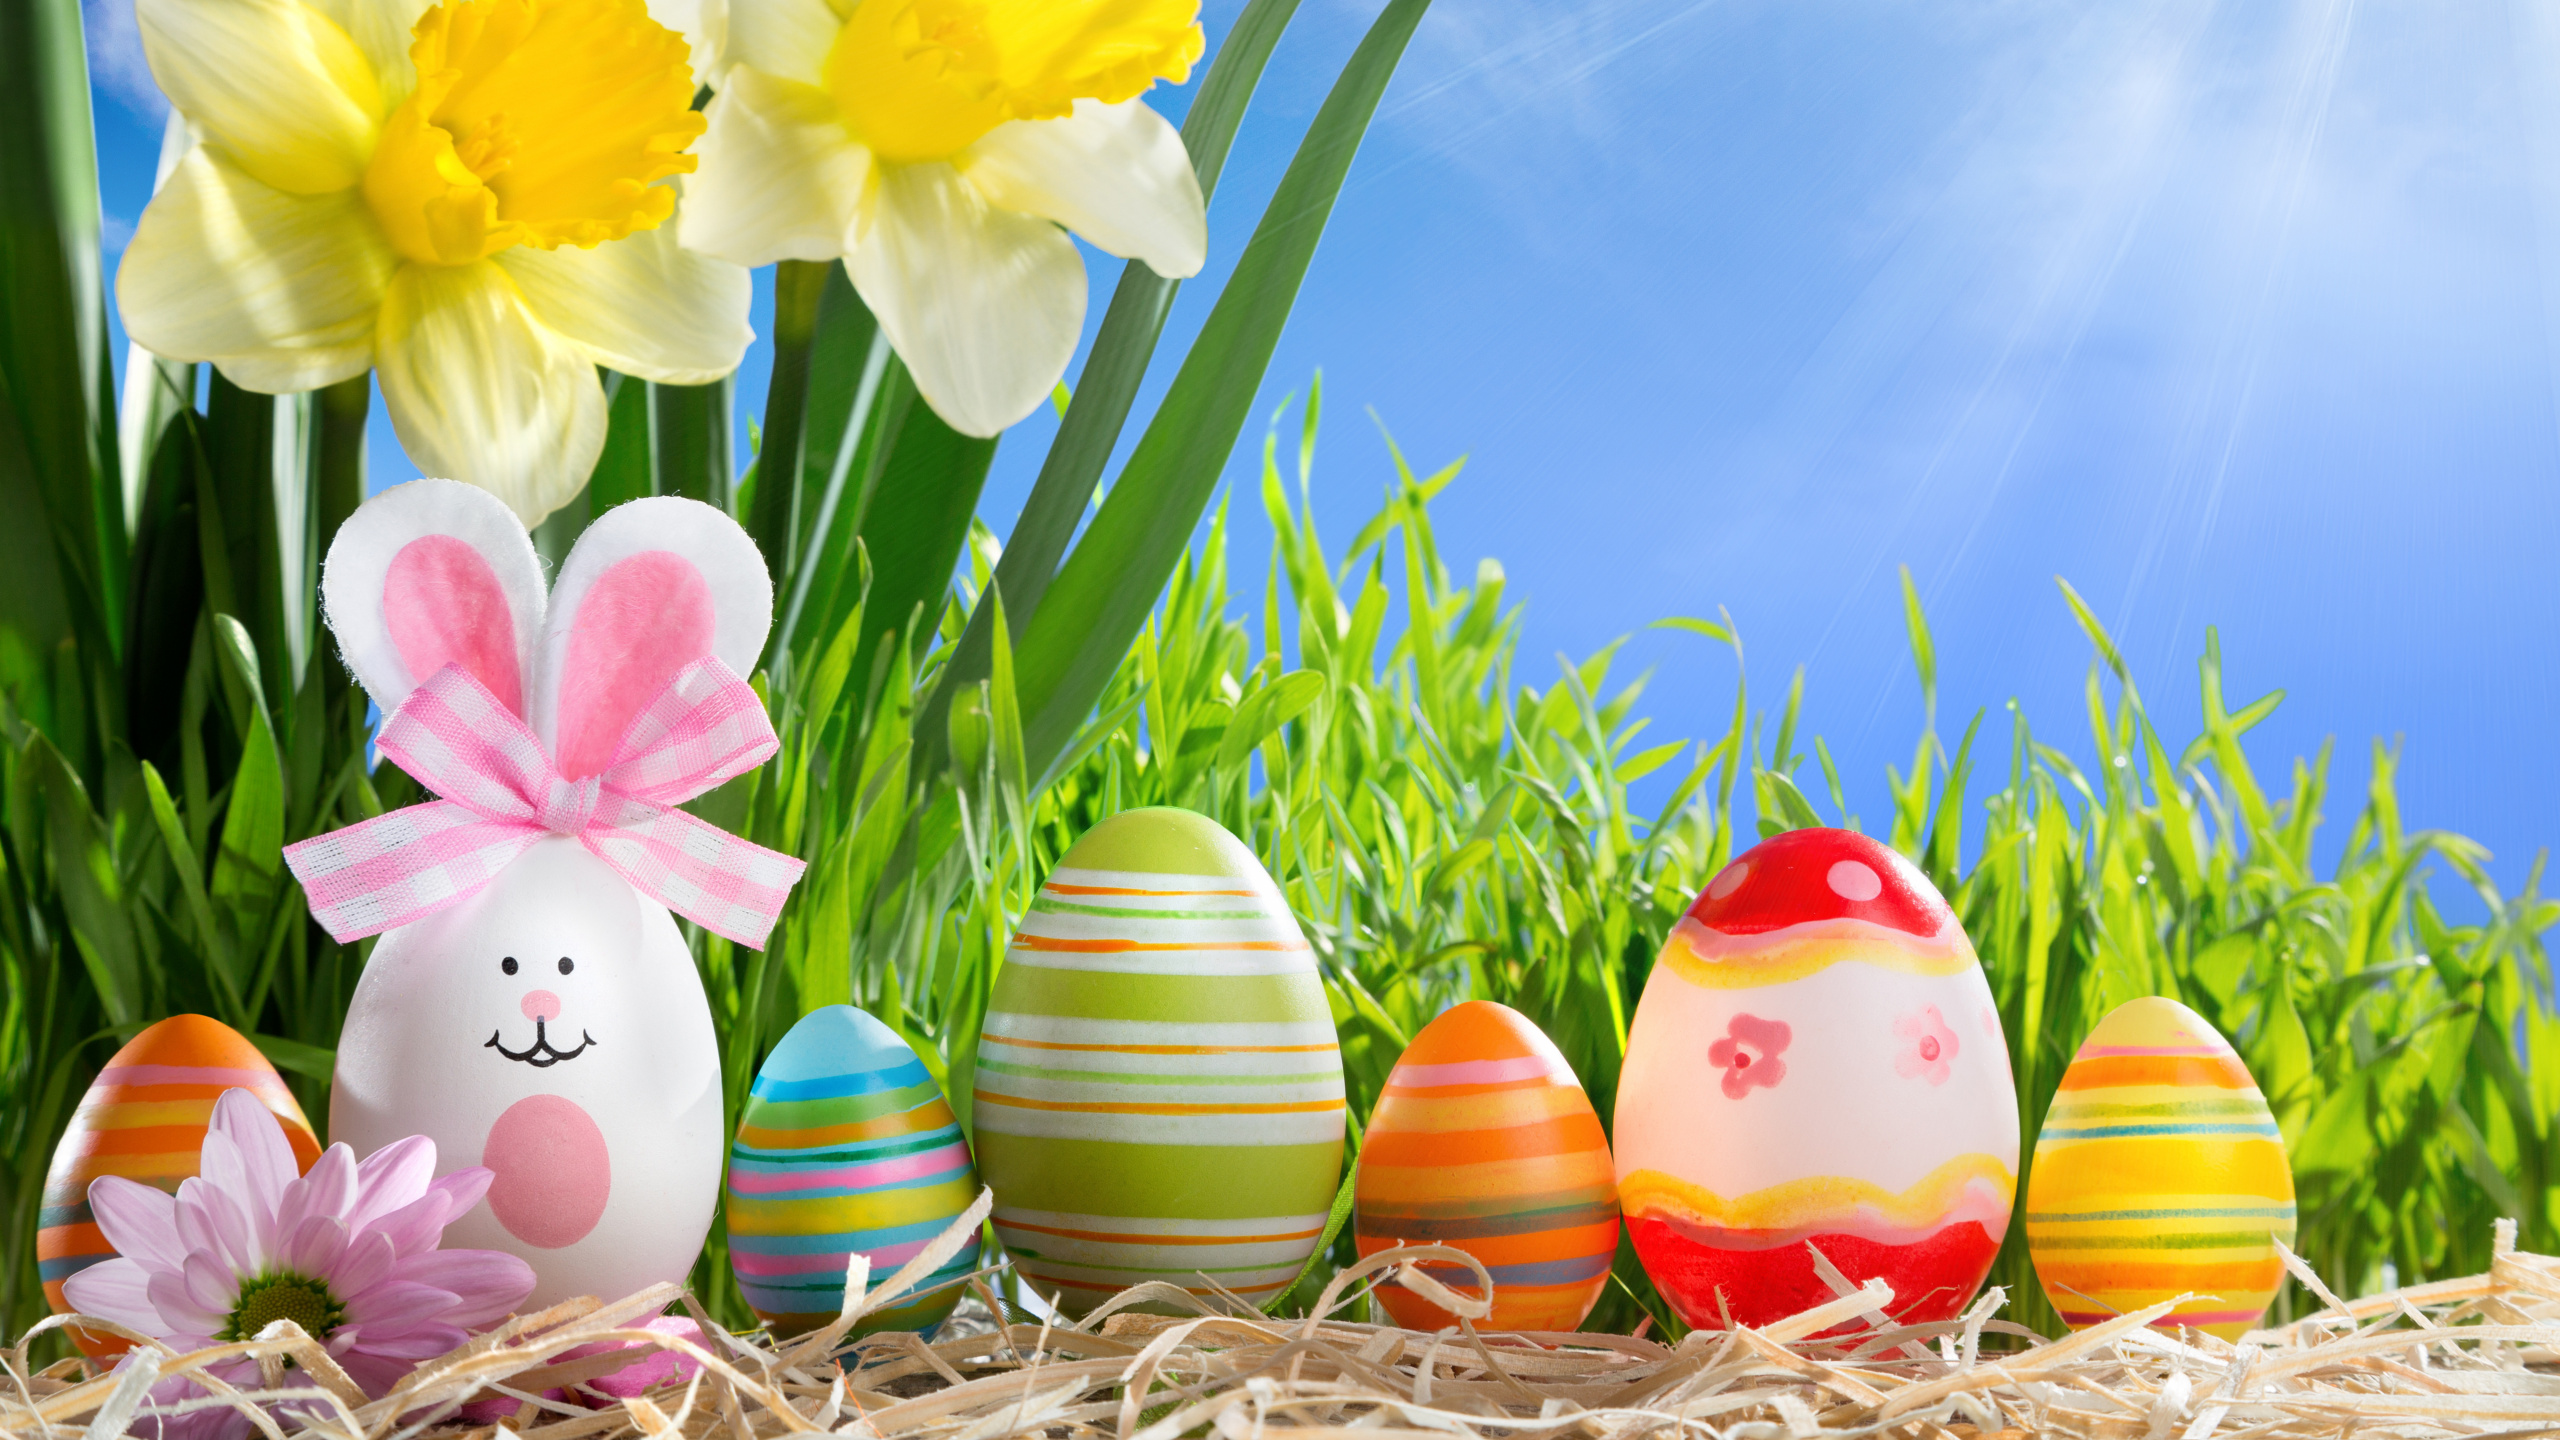 Easter Egg, Spring, Holiday, Easter, Grass. Wallpaper in 2560x1440 Resolution